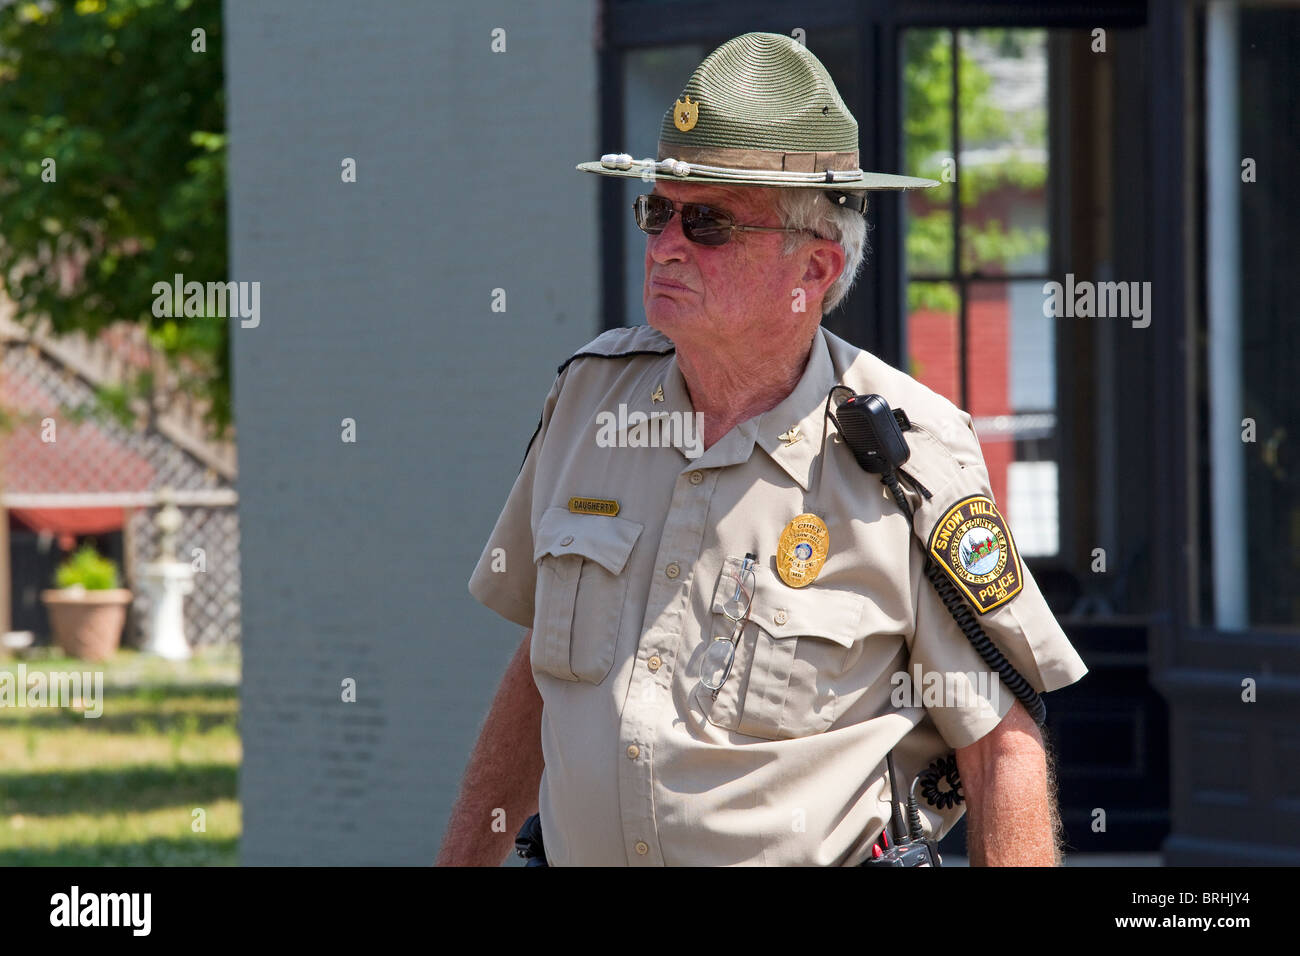 Policeman, police officer, state trooper, sheriff directs traffic in street Stock Photo